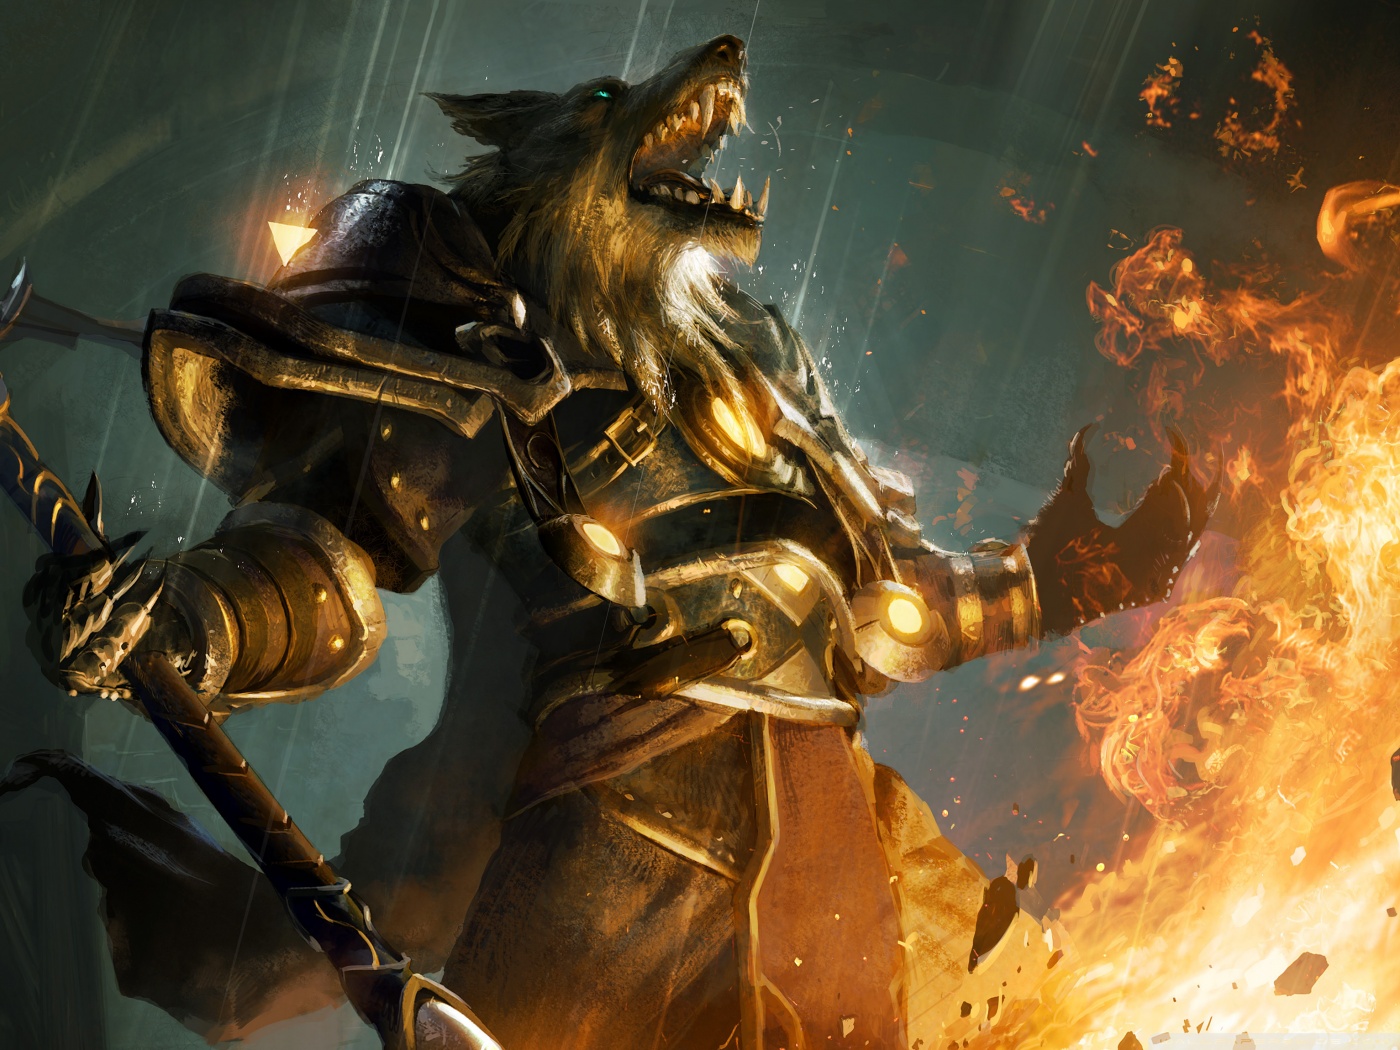 worgen wallpaper,action adventure game,cg artwork,pc game,fictional character,mythology